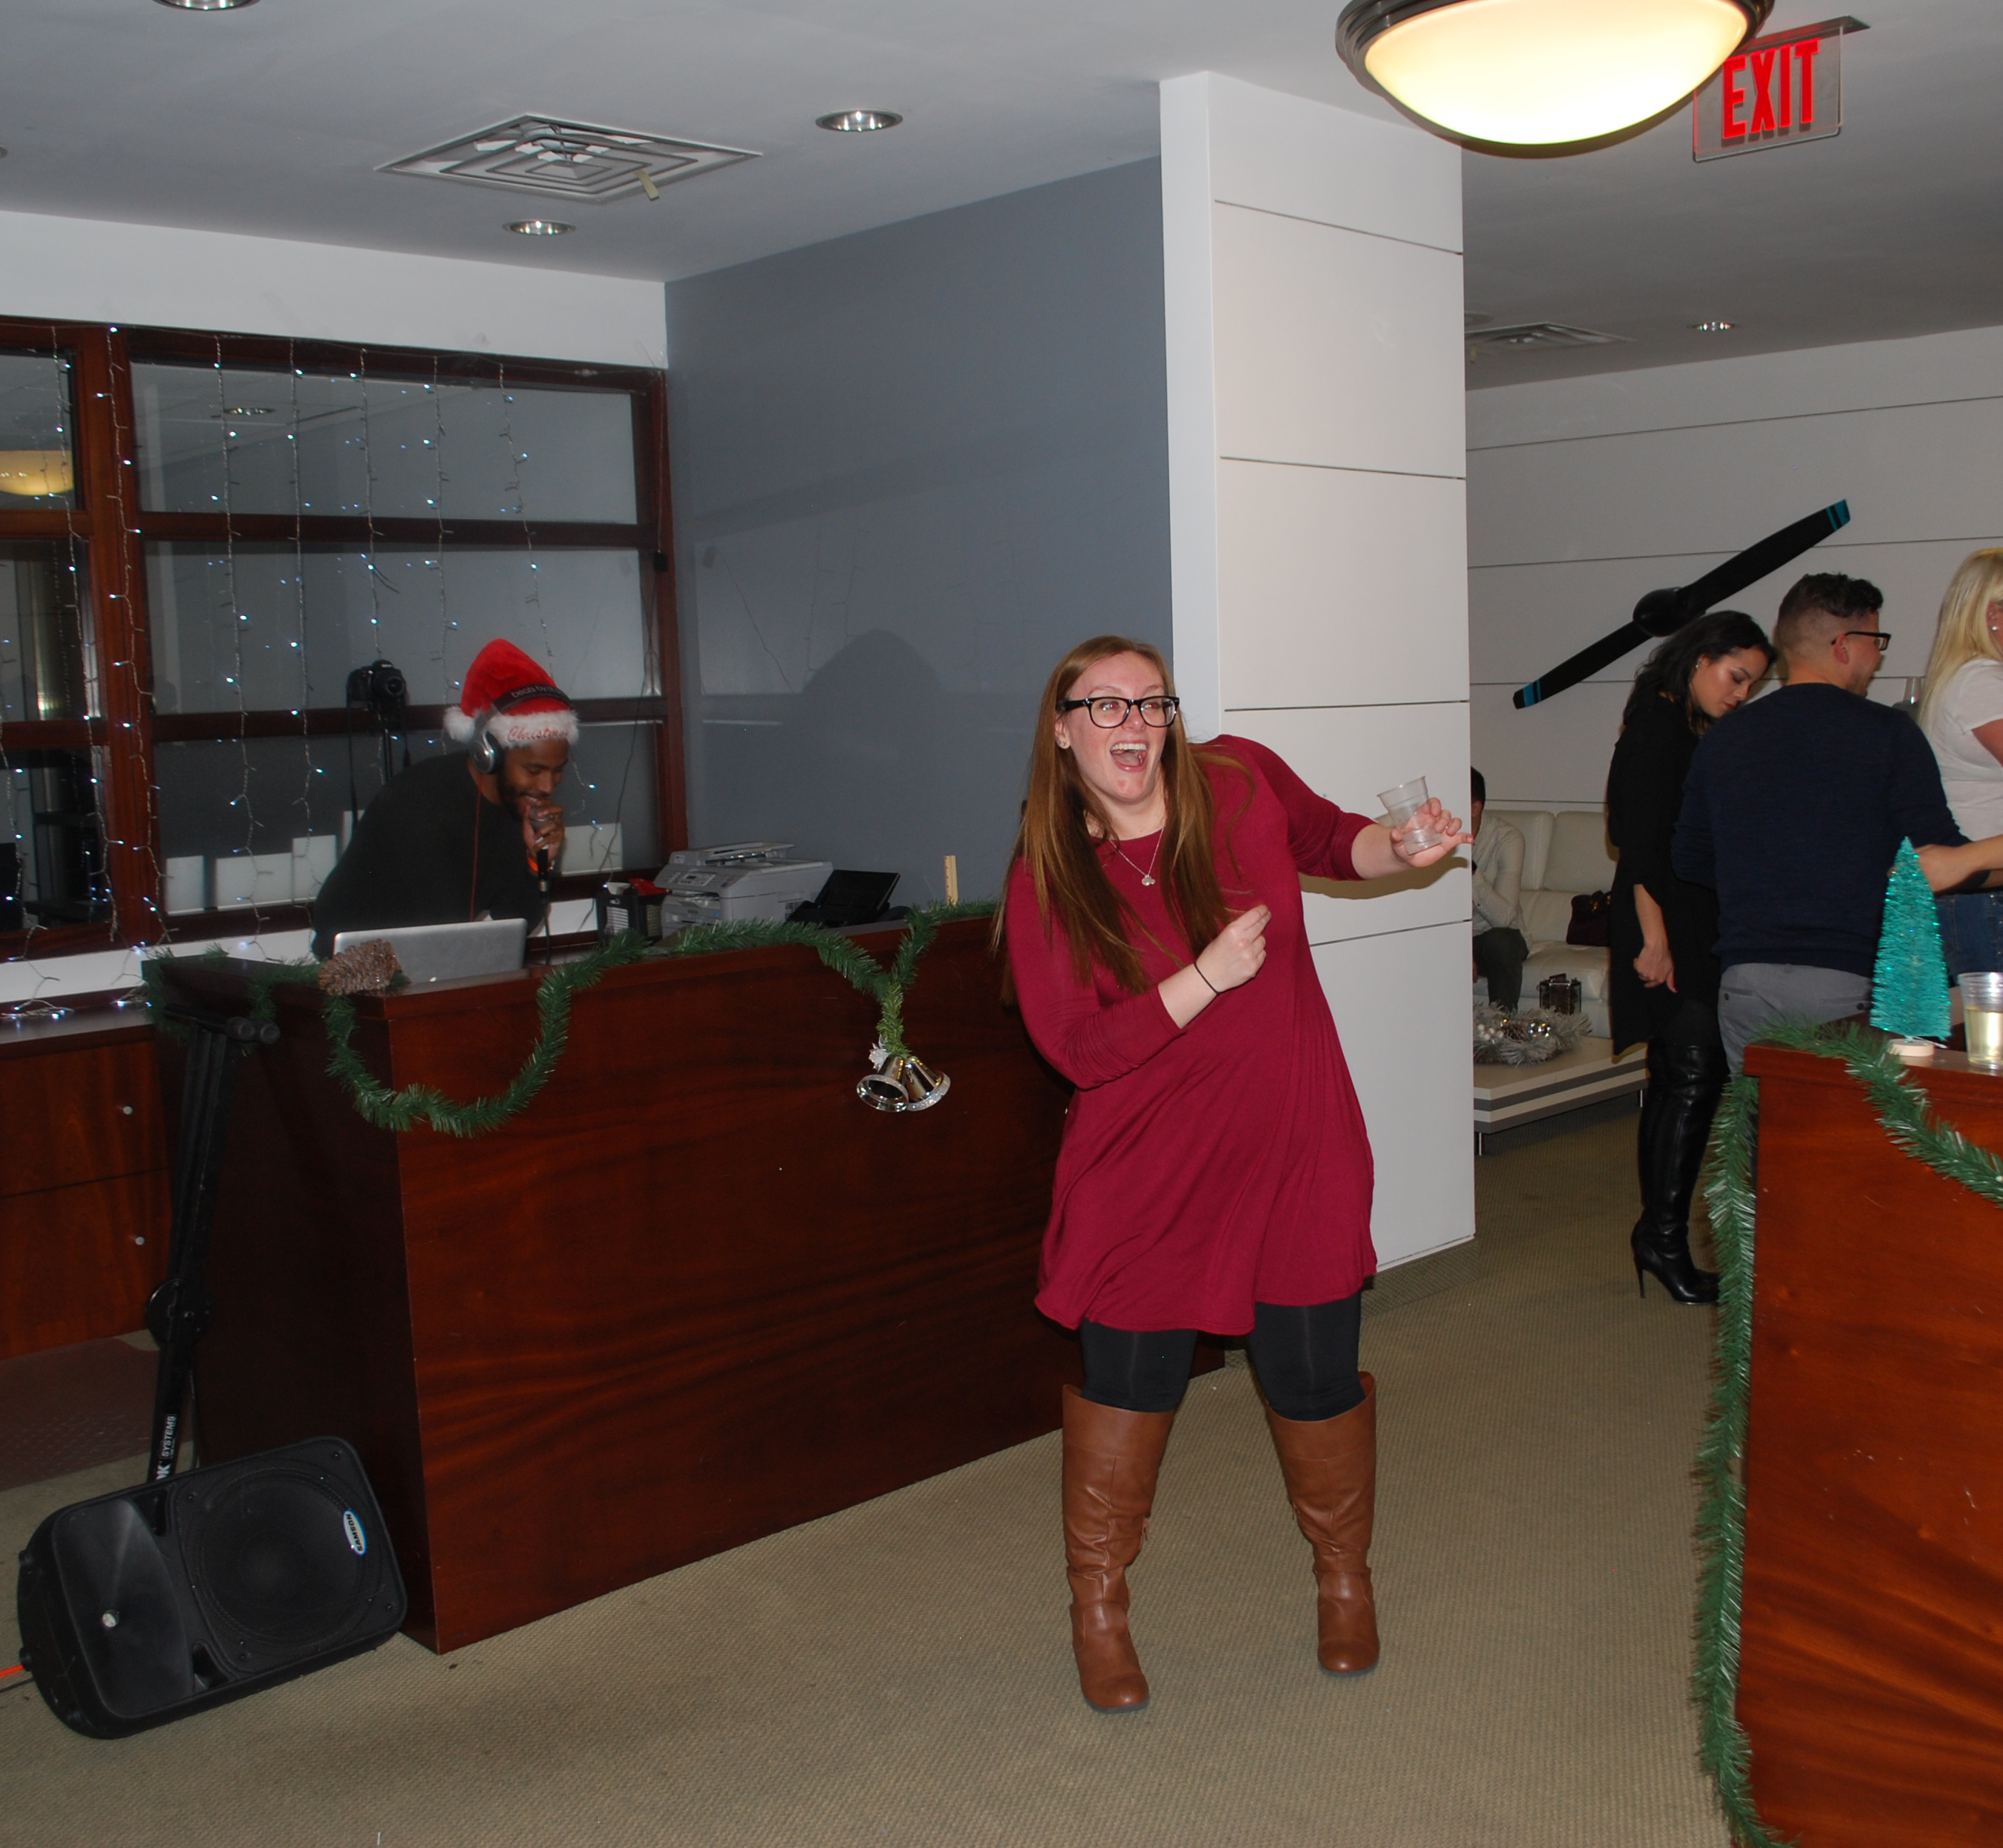 Team member Eileen dancing at the holiday party